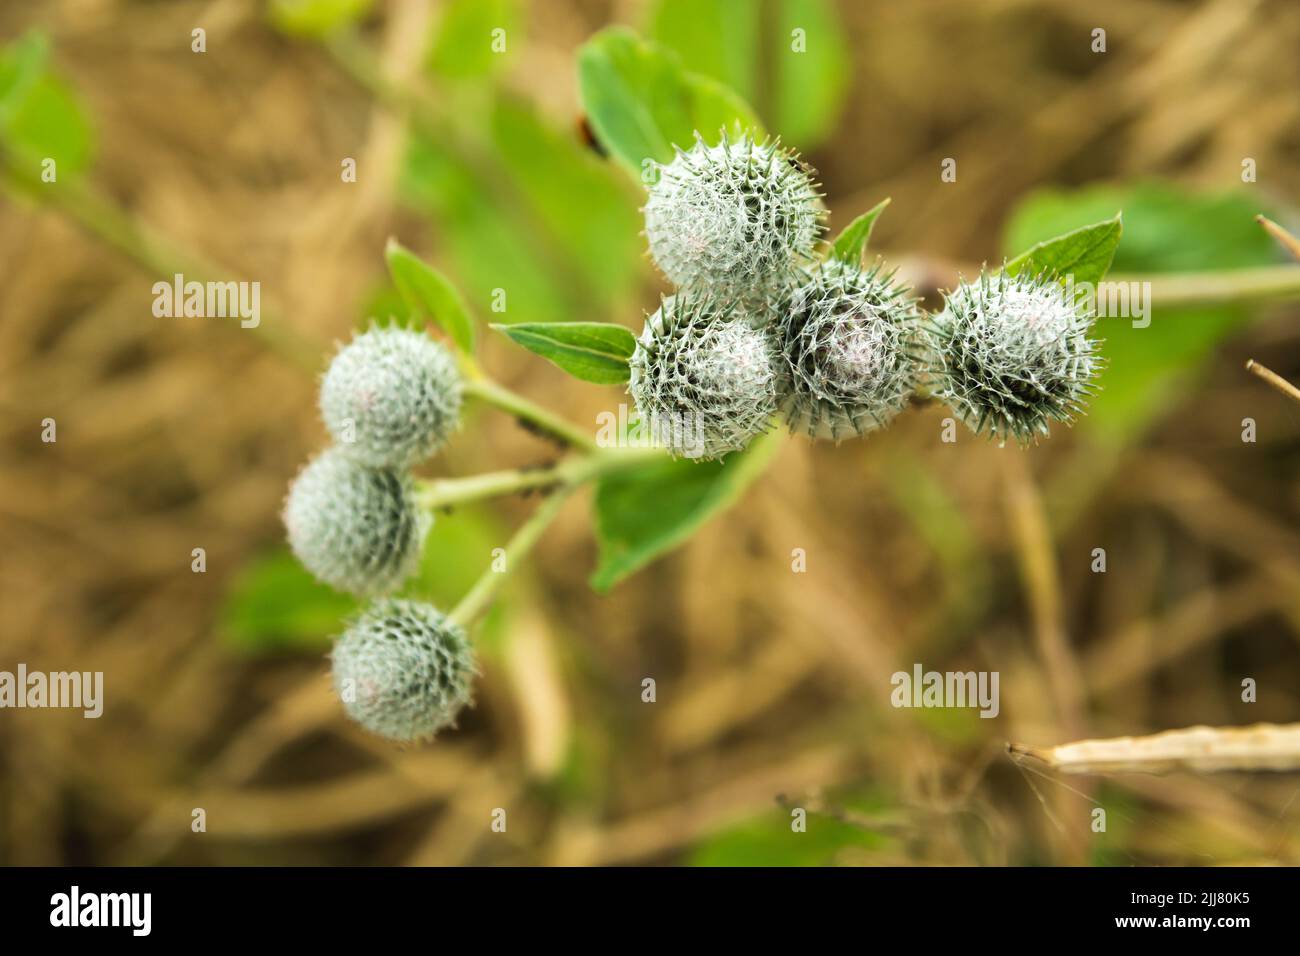 Prickly greater burdock plant on close up, summer view Stock Photo